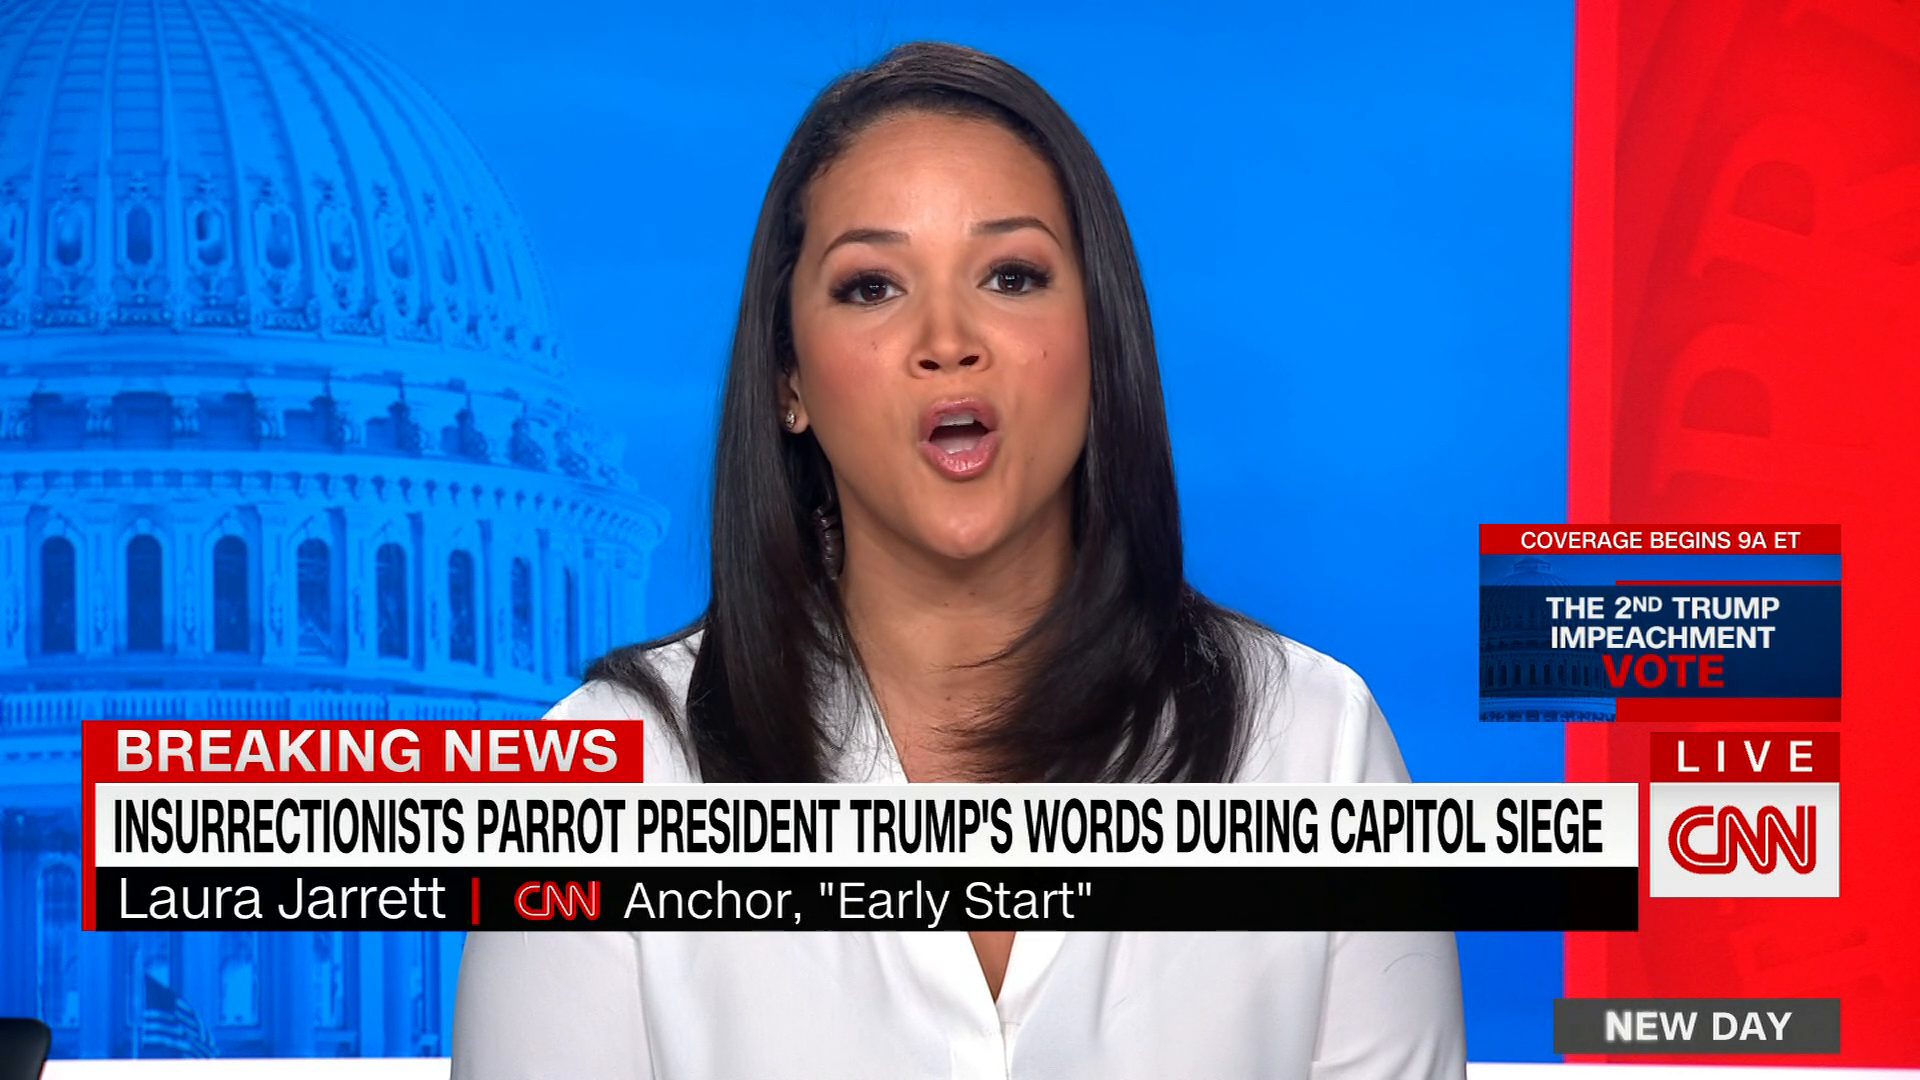 cms3-CNN-trump-protesters-language-capitol-riot-impeachment-laura-jarrett-live-newday-vpx-primary-58738-80463-1.png